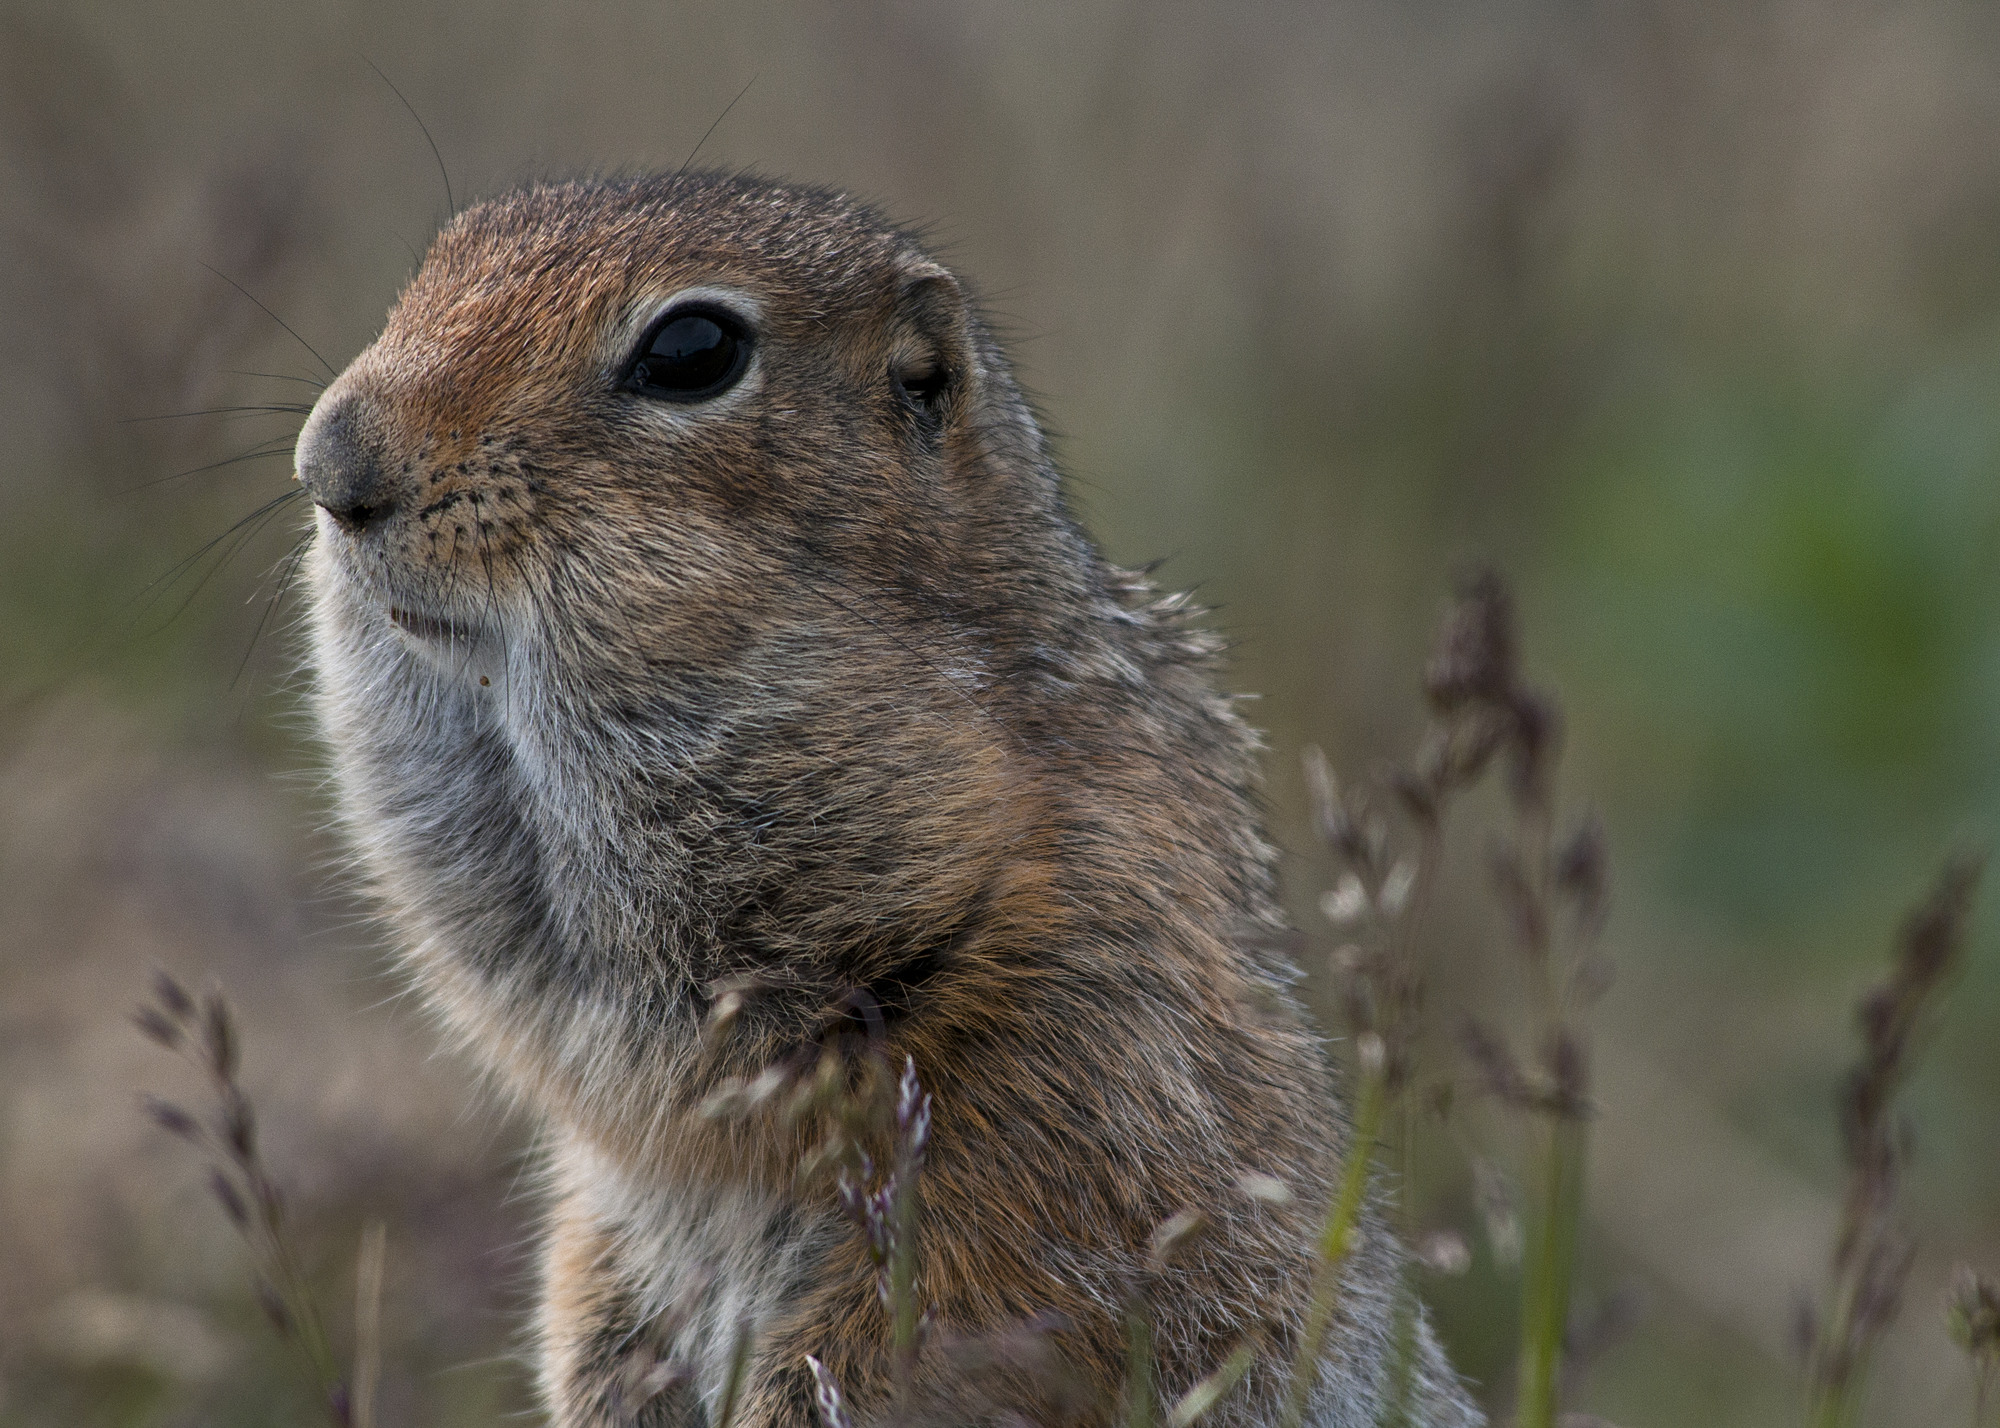 A ground squirrel with food stashed in its cheeks